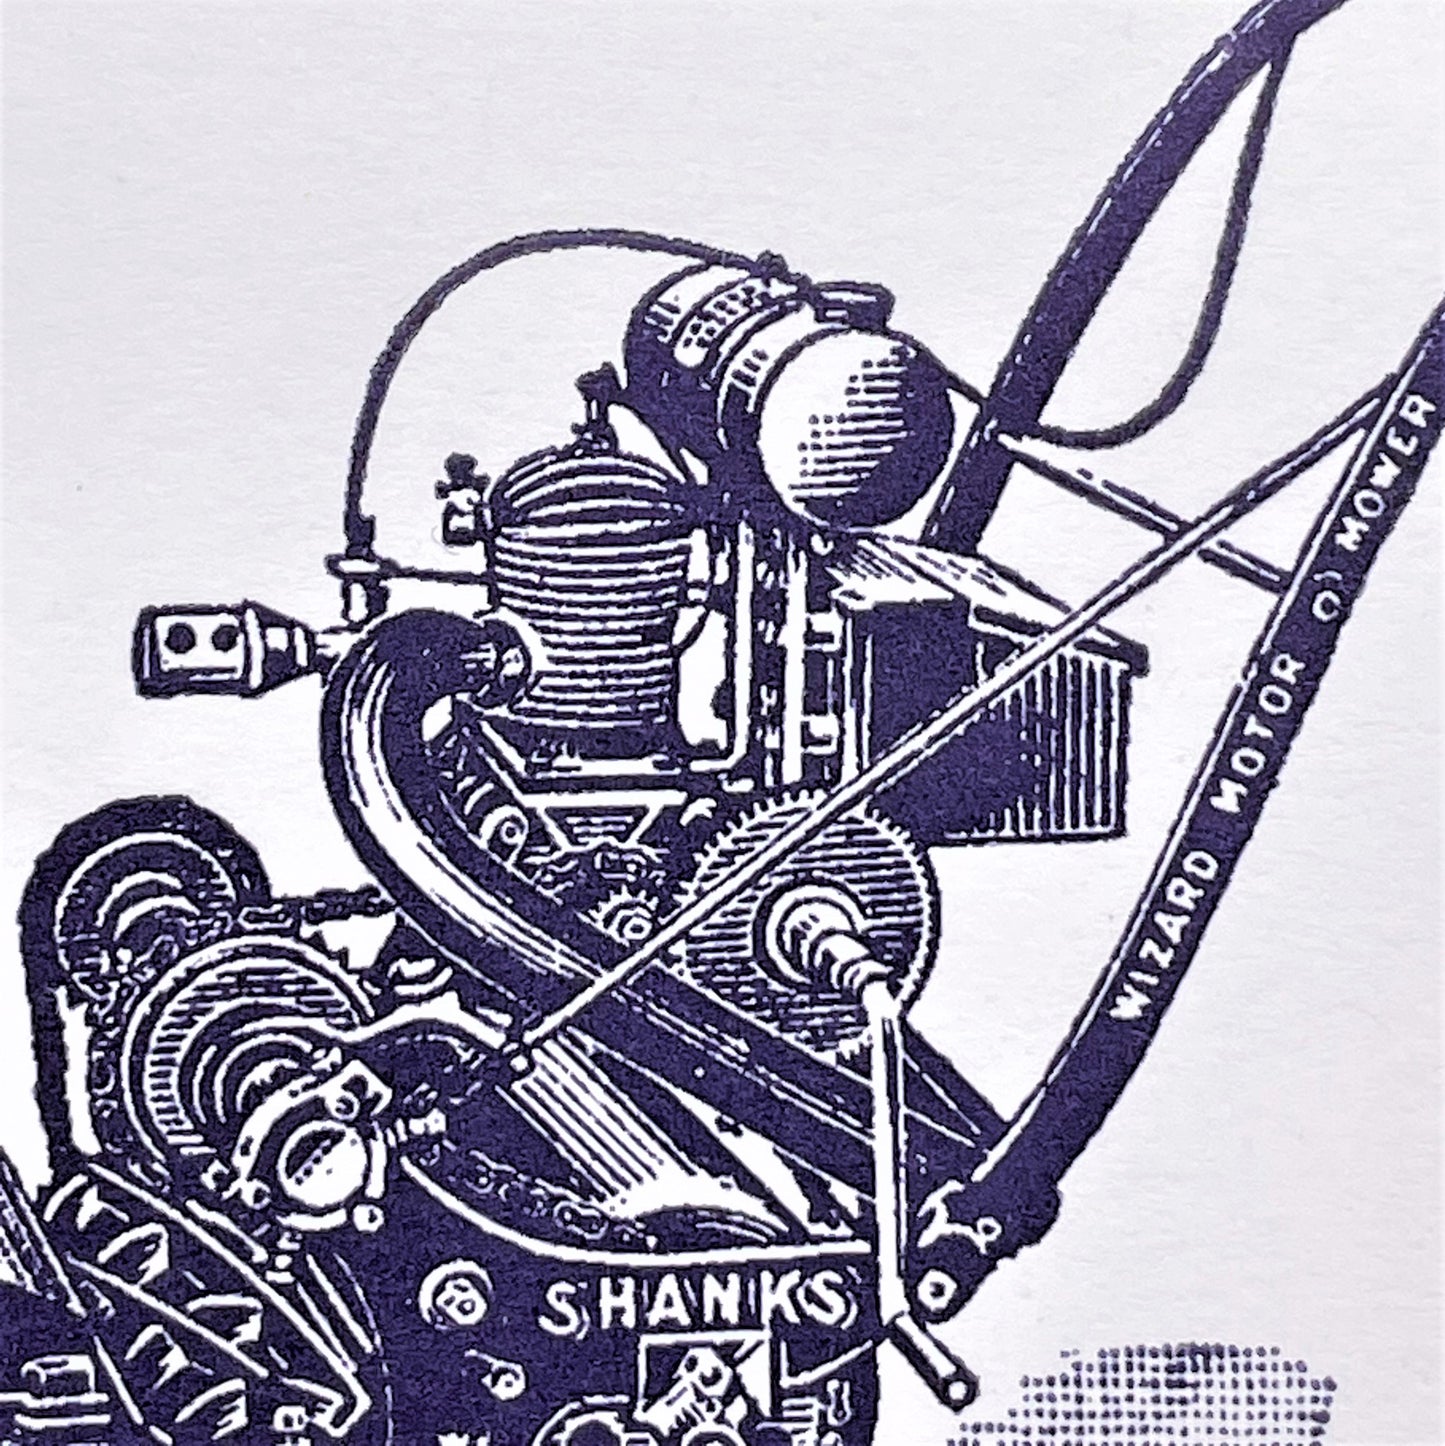 letterpress greetings card of a drawing of a vintage lawn mower, dark blue ink on white, close-up